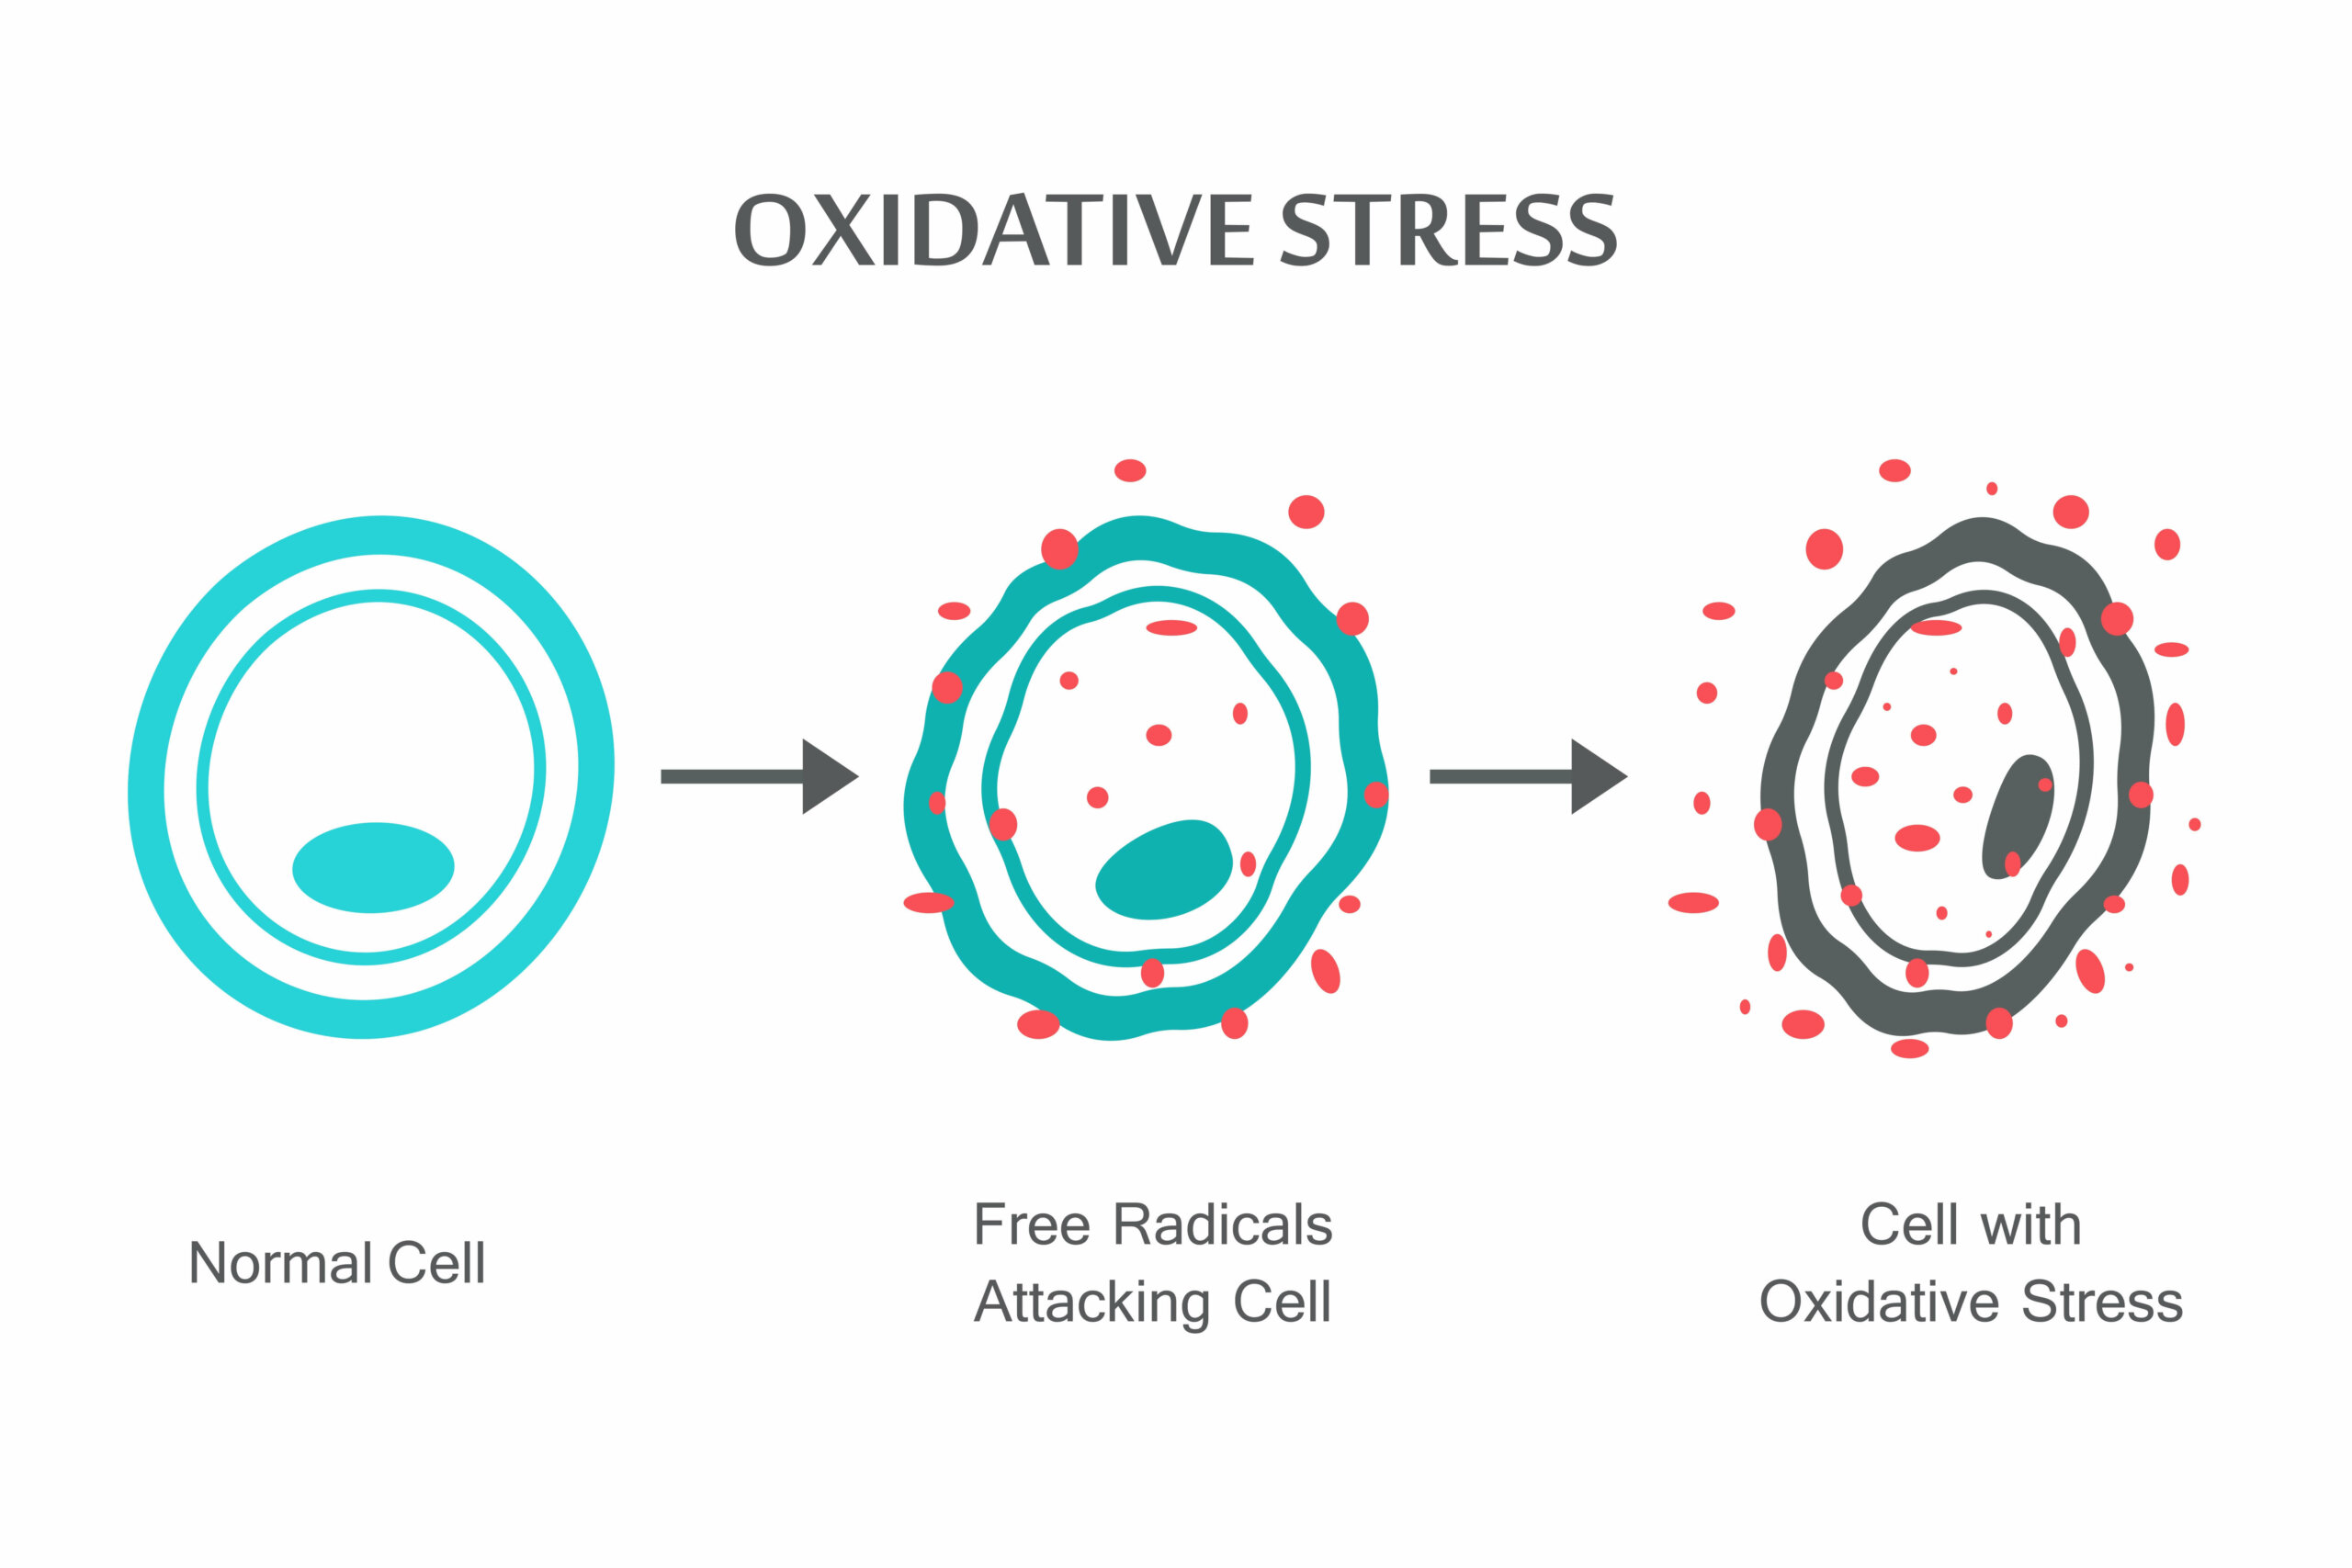 Oxidative stress on the cells.